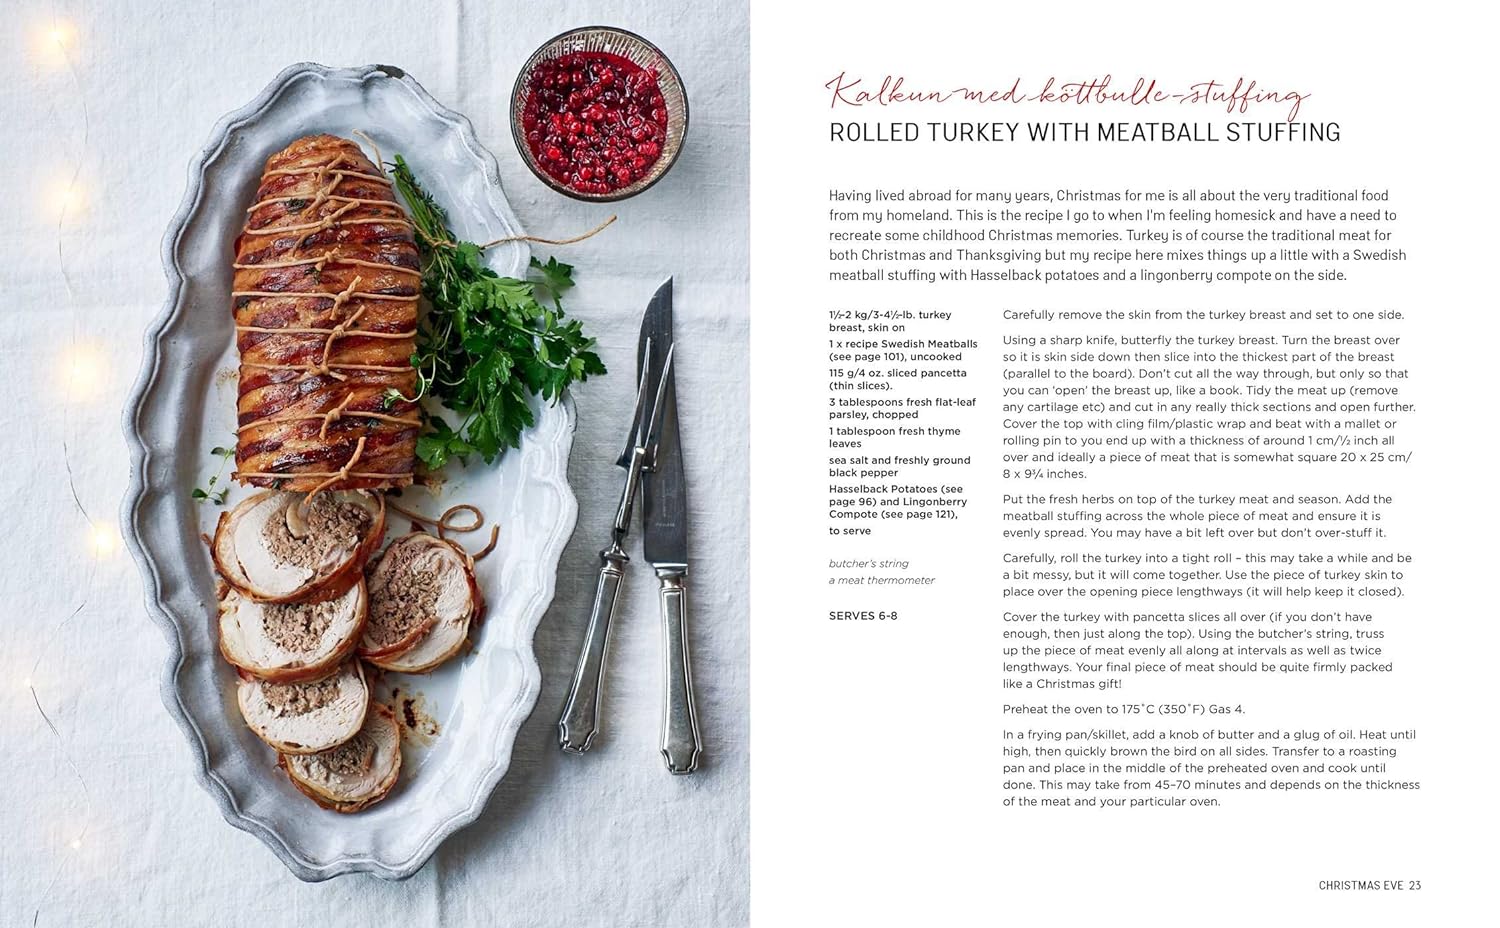 ScandiKitchen Christmas Book: Recipes and traditions from Scandinavia